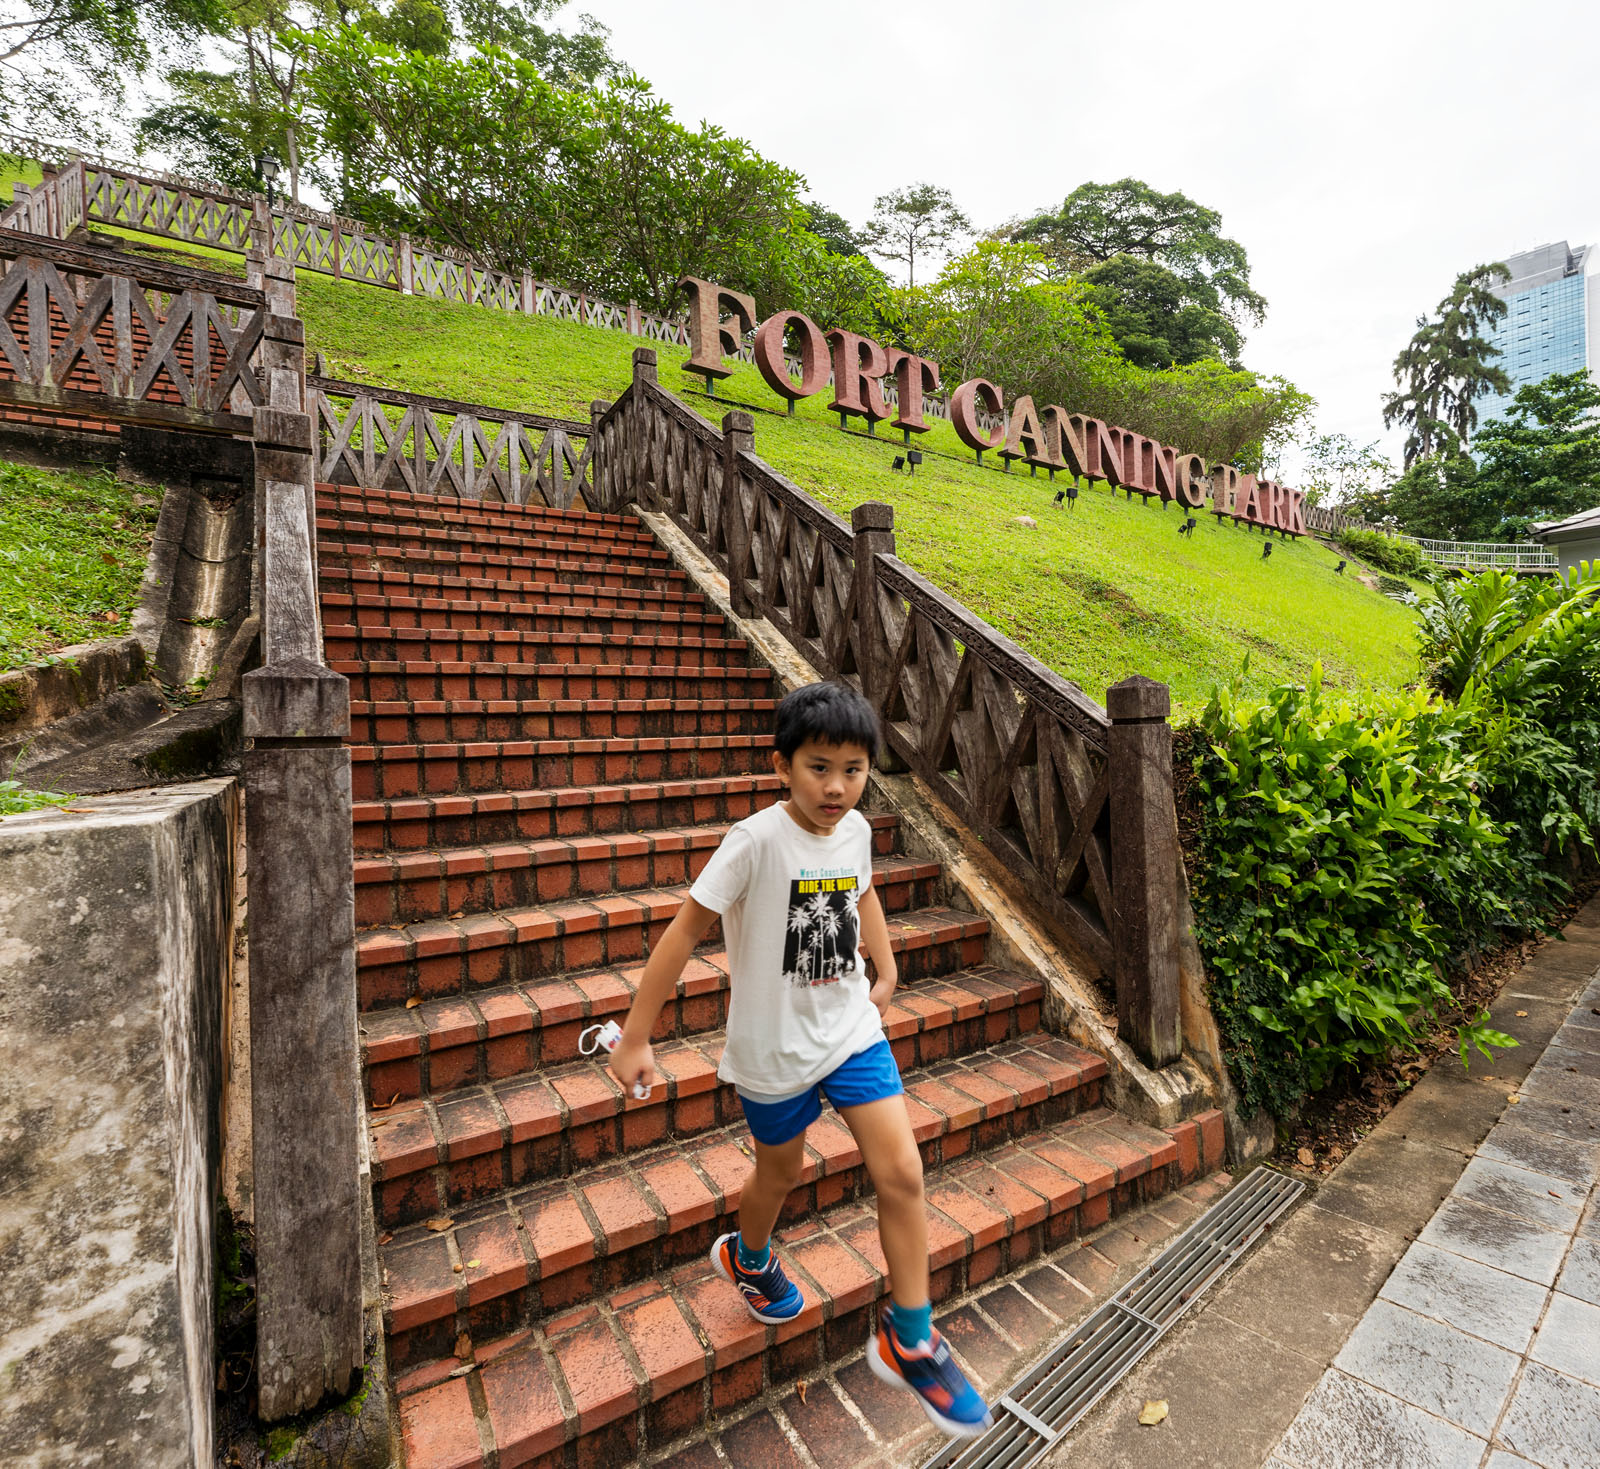 Fort Canning, Singapore, June 2021